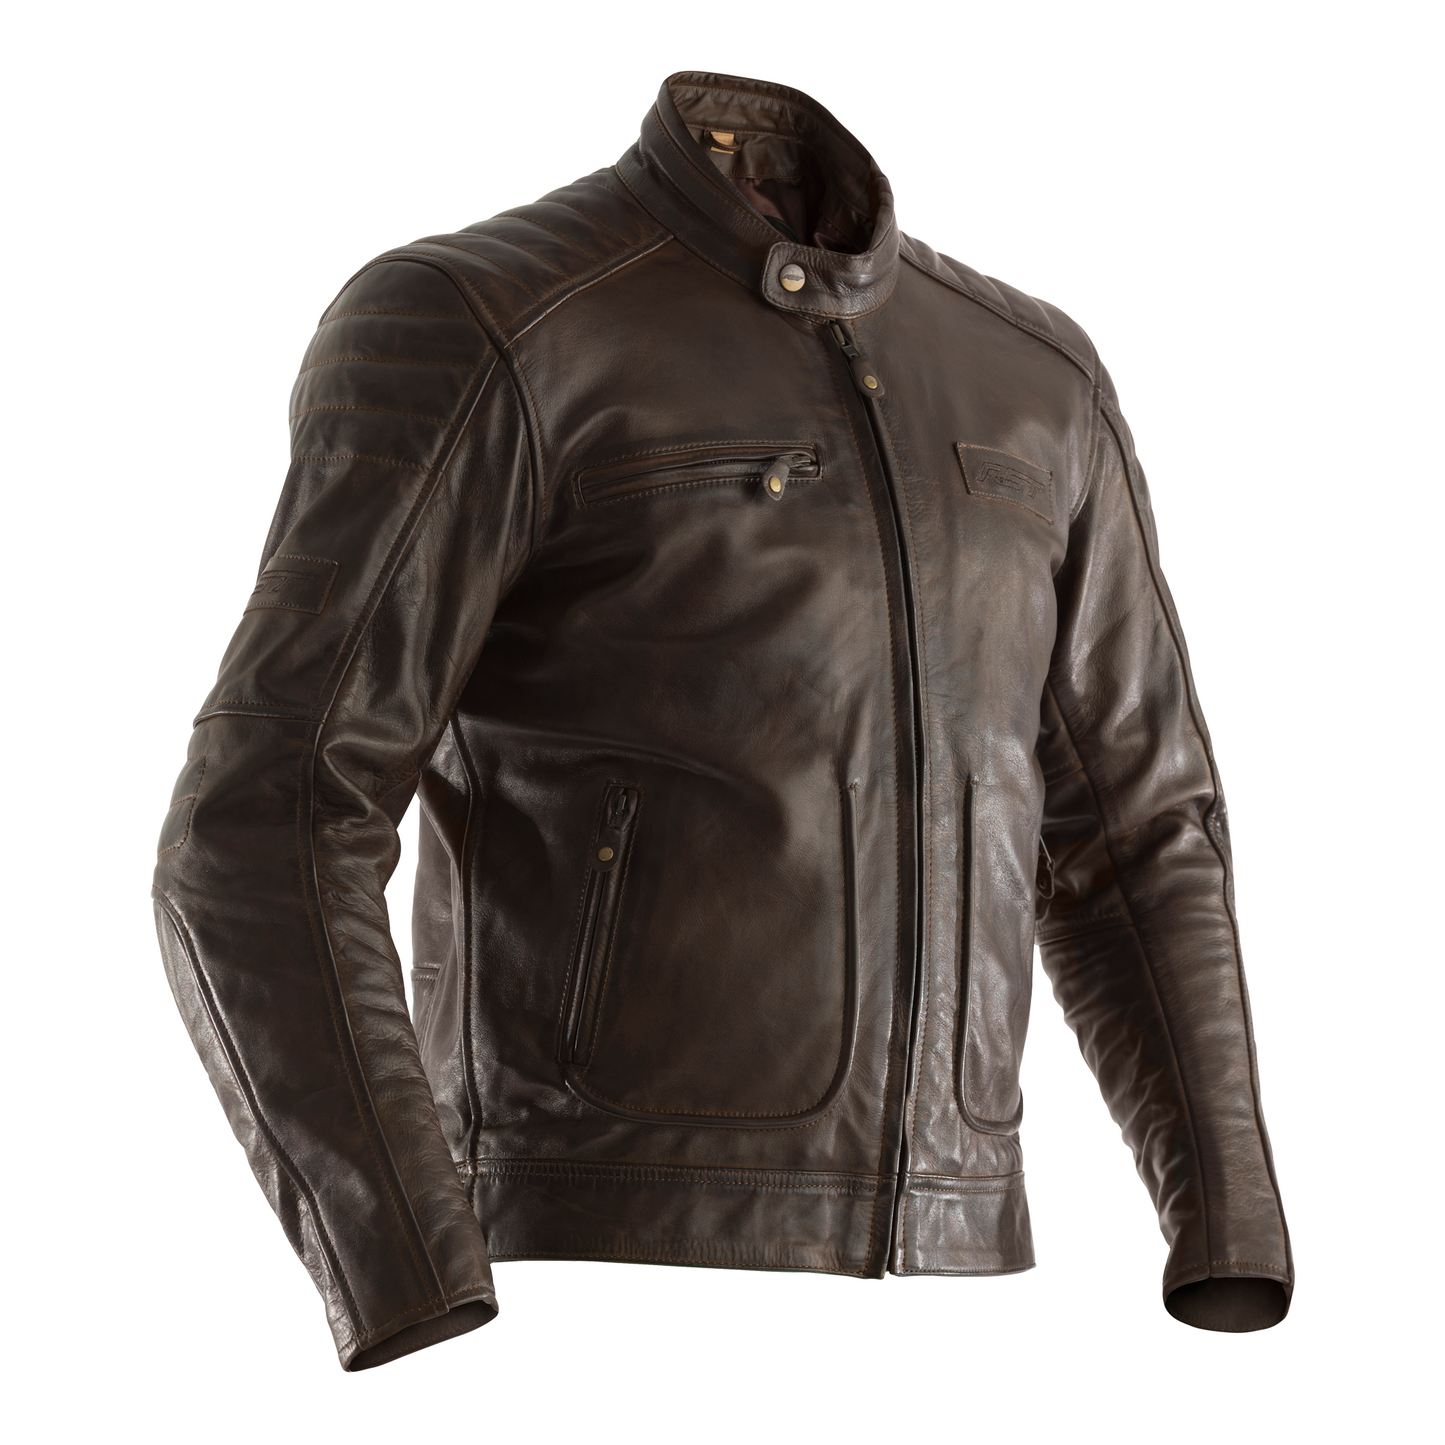 RST Roadster 2 II Classic Leather Jacket - 2833 - Tobacco Brown